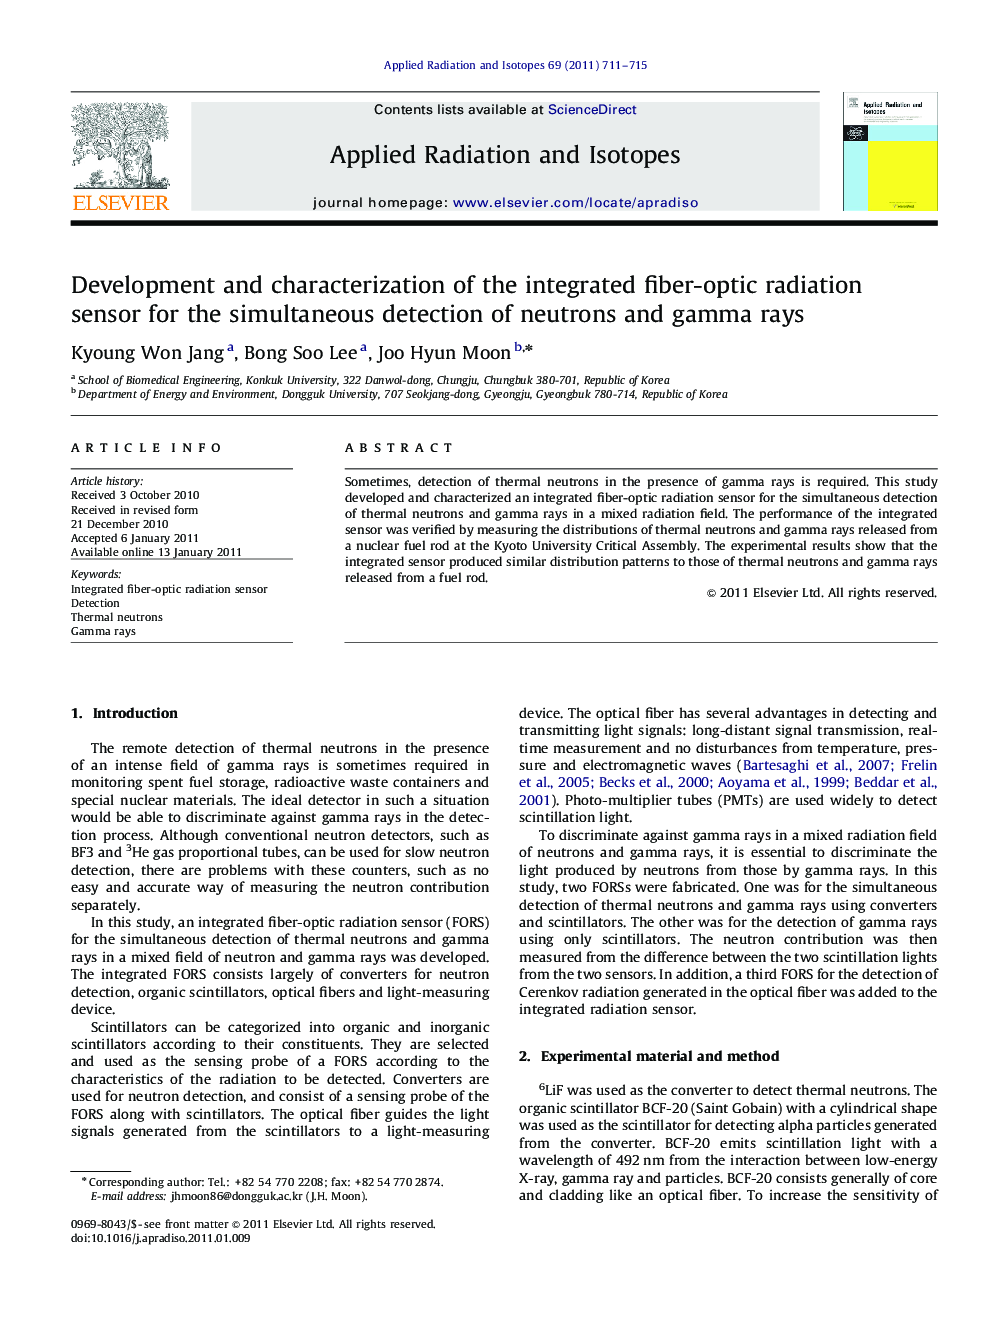 Development and characterization of the integrated fiber-optic radiation sensor for the simultaneous detection of neutrons and gamma rays